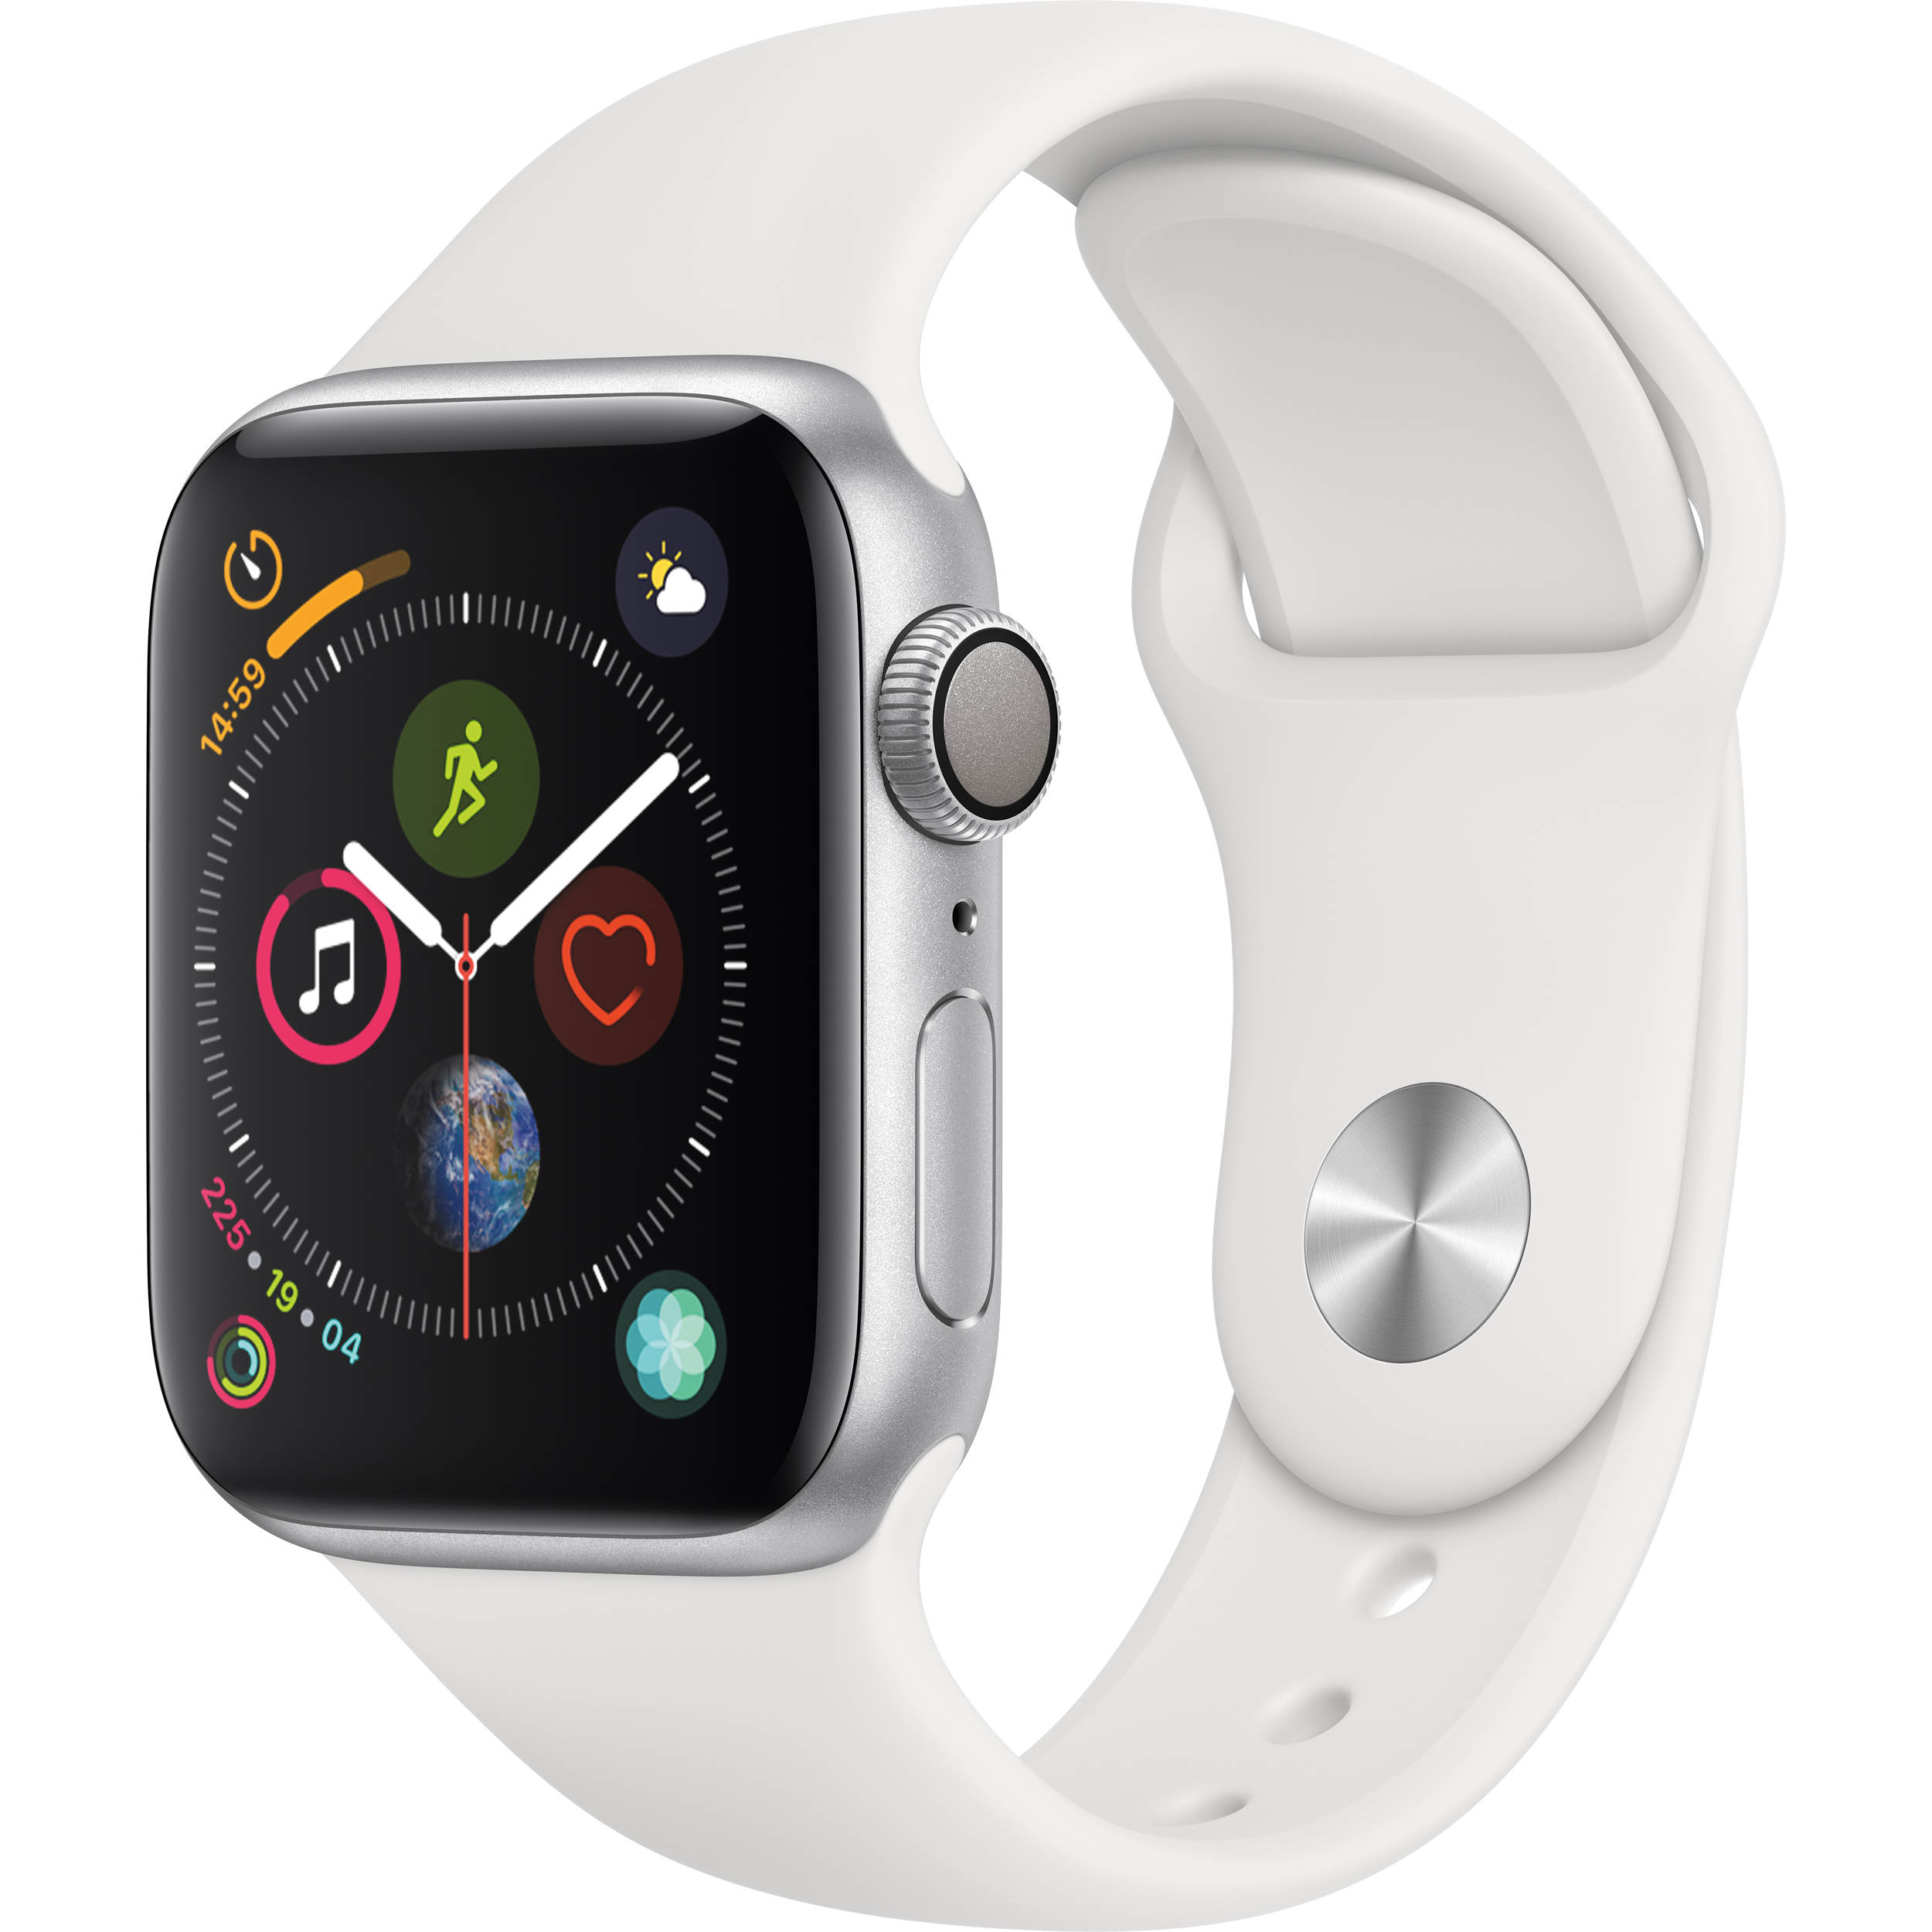 Sell Apple Watch Series 4